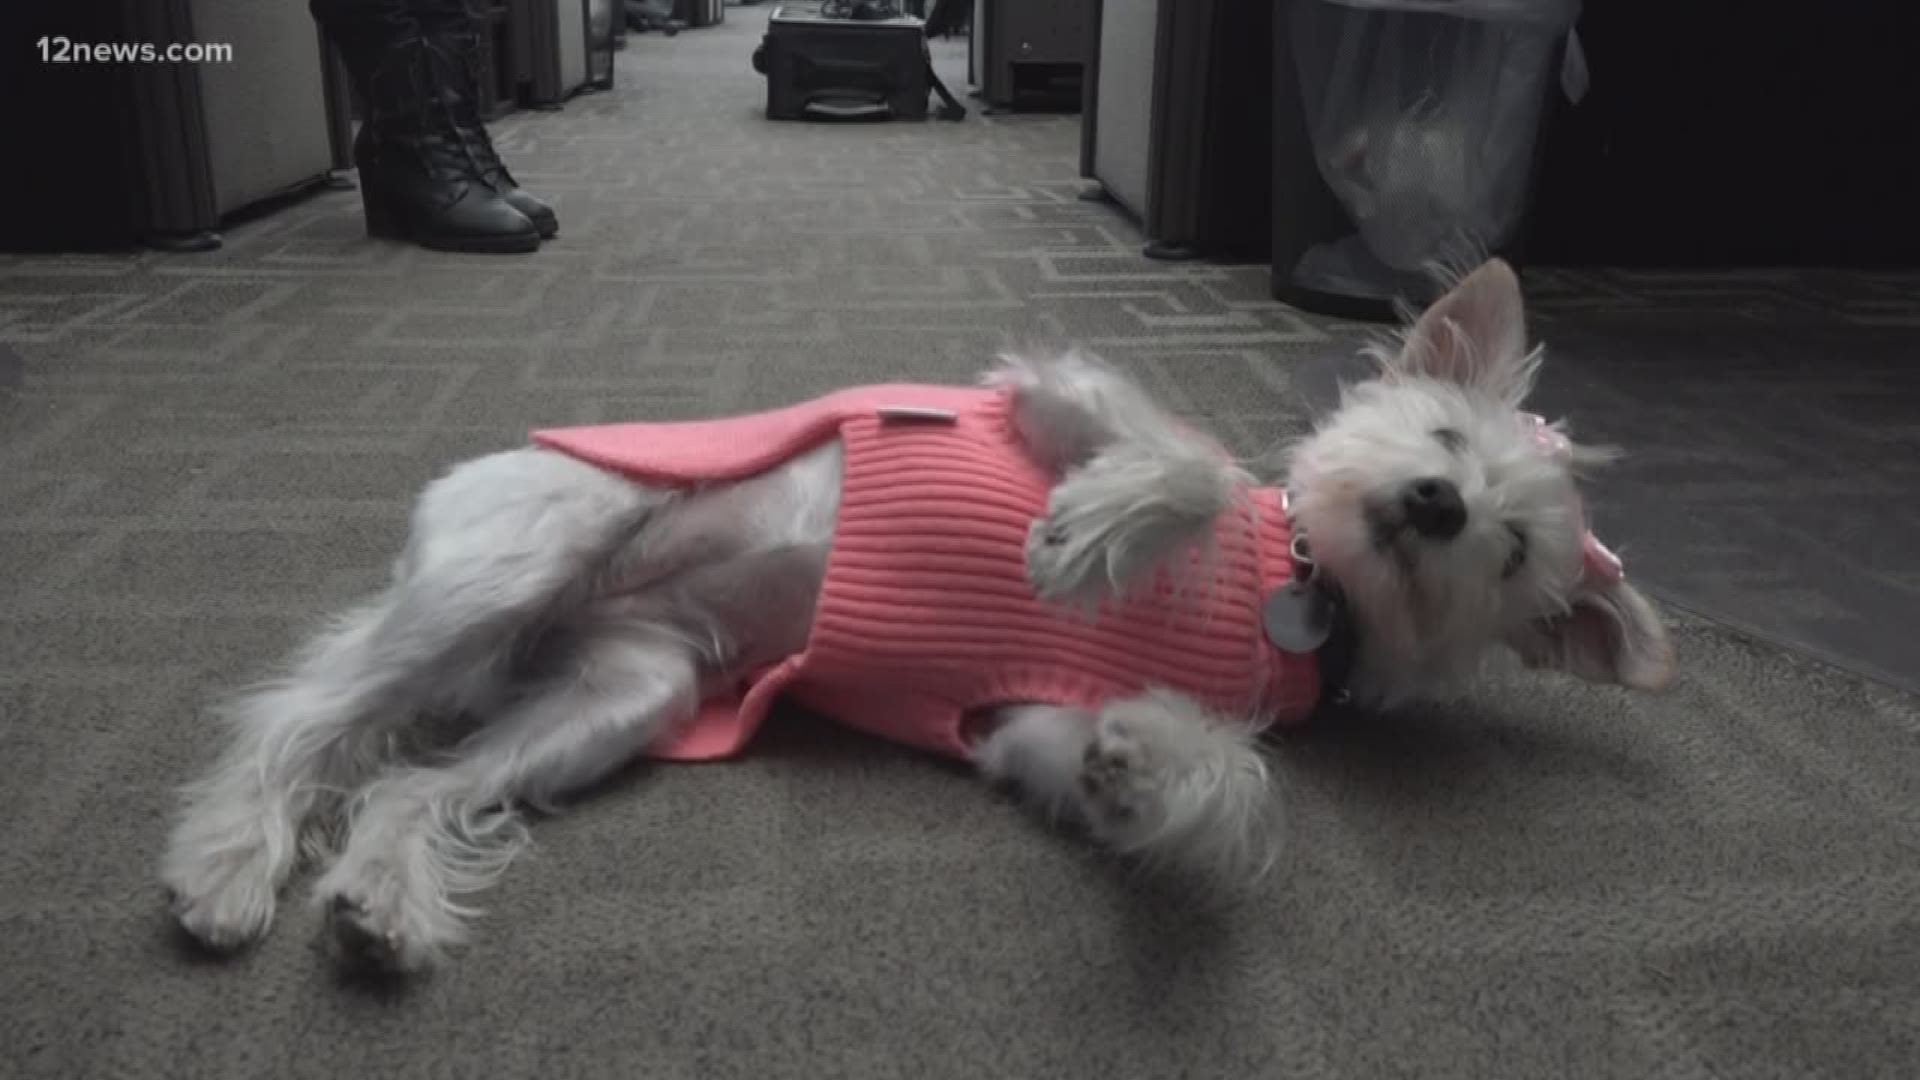 In January, 911 dispatchers in Scottsdale adopted a two-year-old terrier mix named Poppy. Poppy lives at the dispatch center, and her task is simple: help dispatchers relieve stress just by being cute.